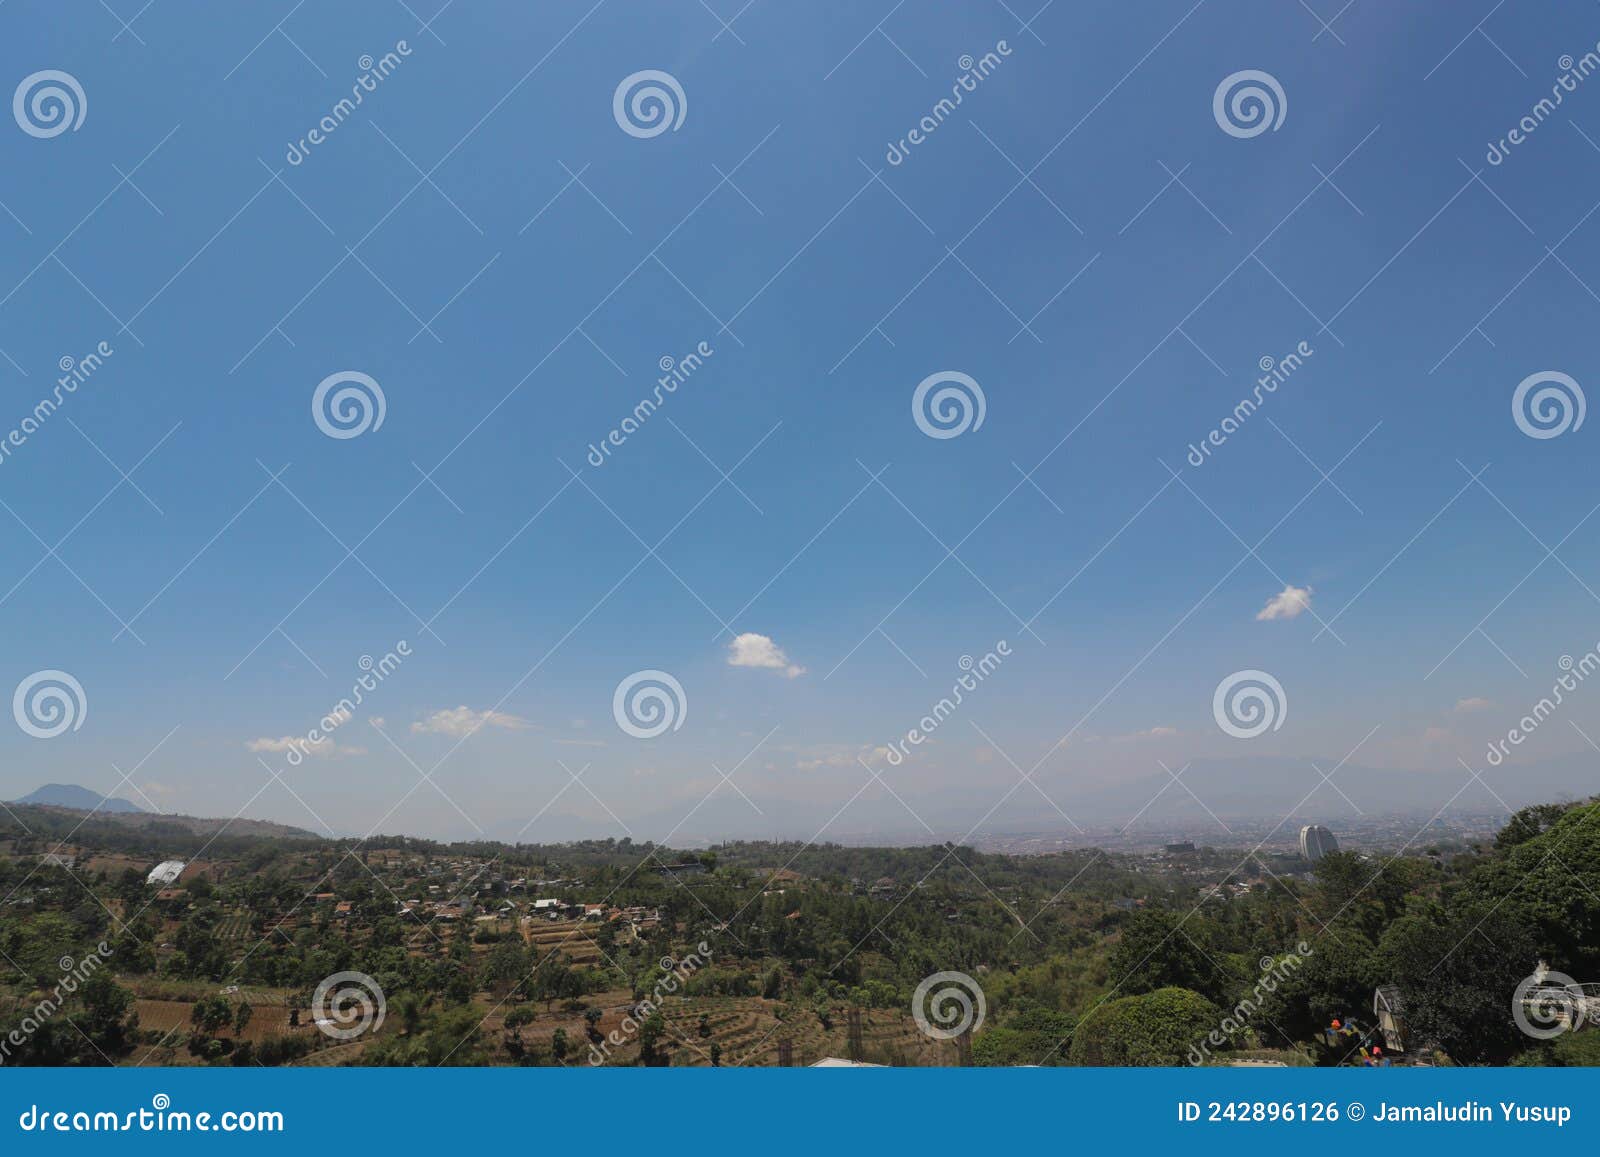 beautiful bandung city landscape with clear sky